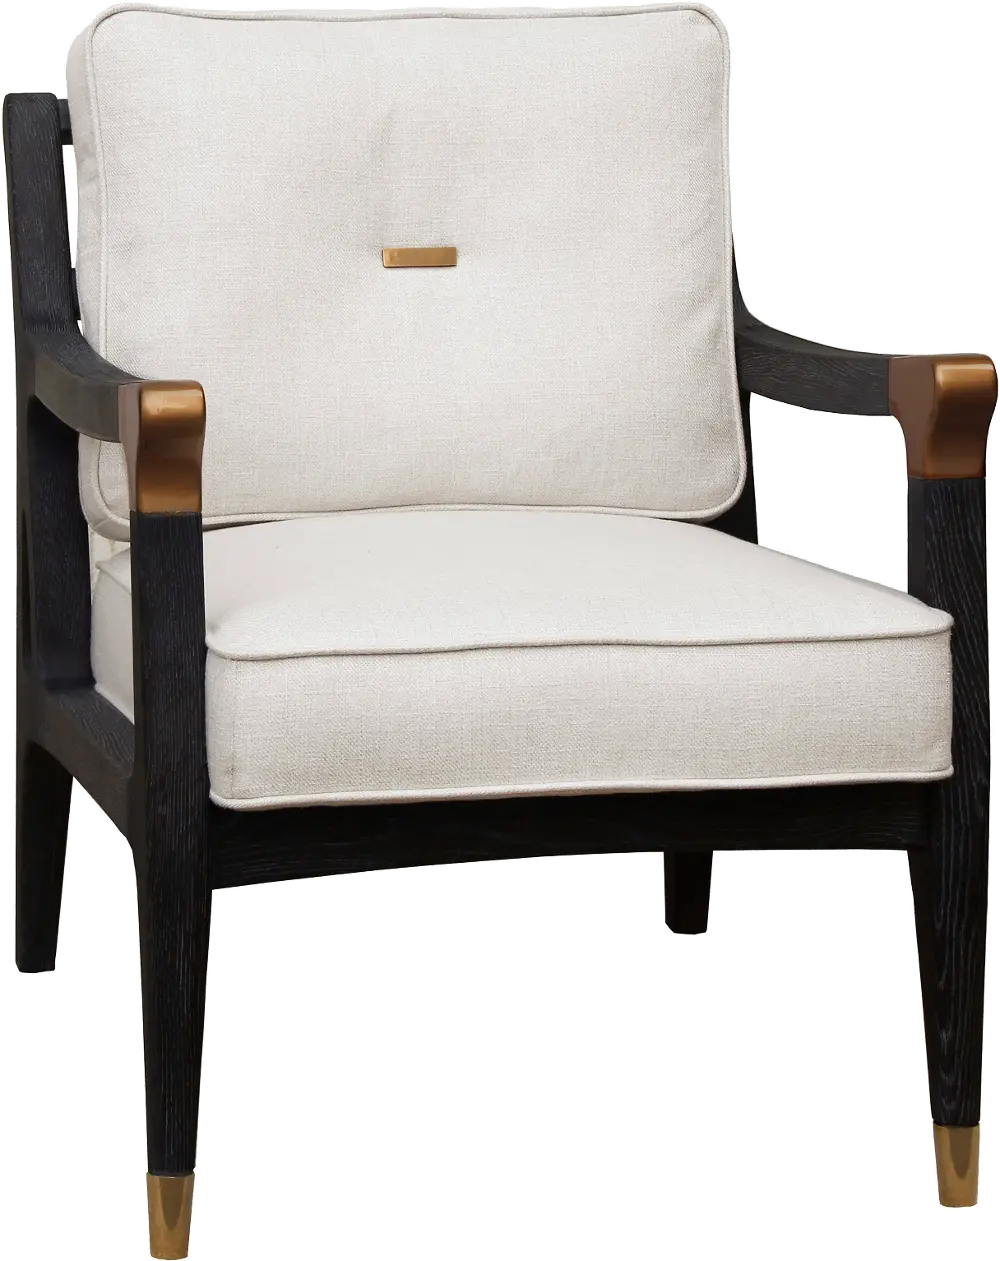 Upholstered White Accent Chair with Black Wooden Frame - Modern Eclectic-1